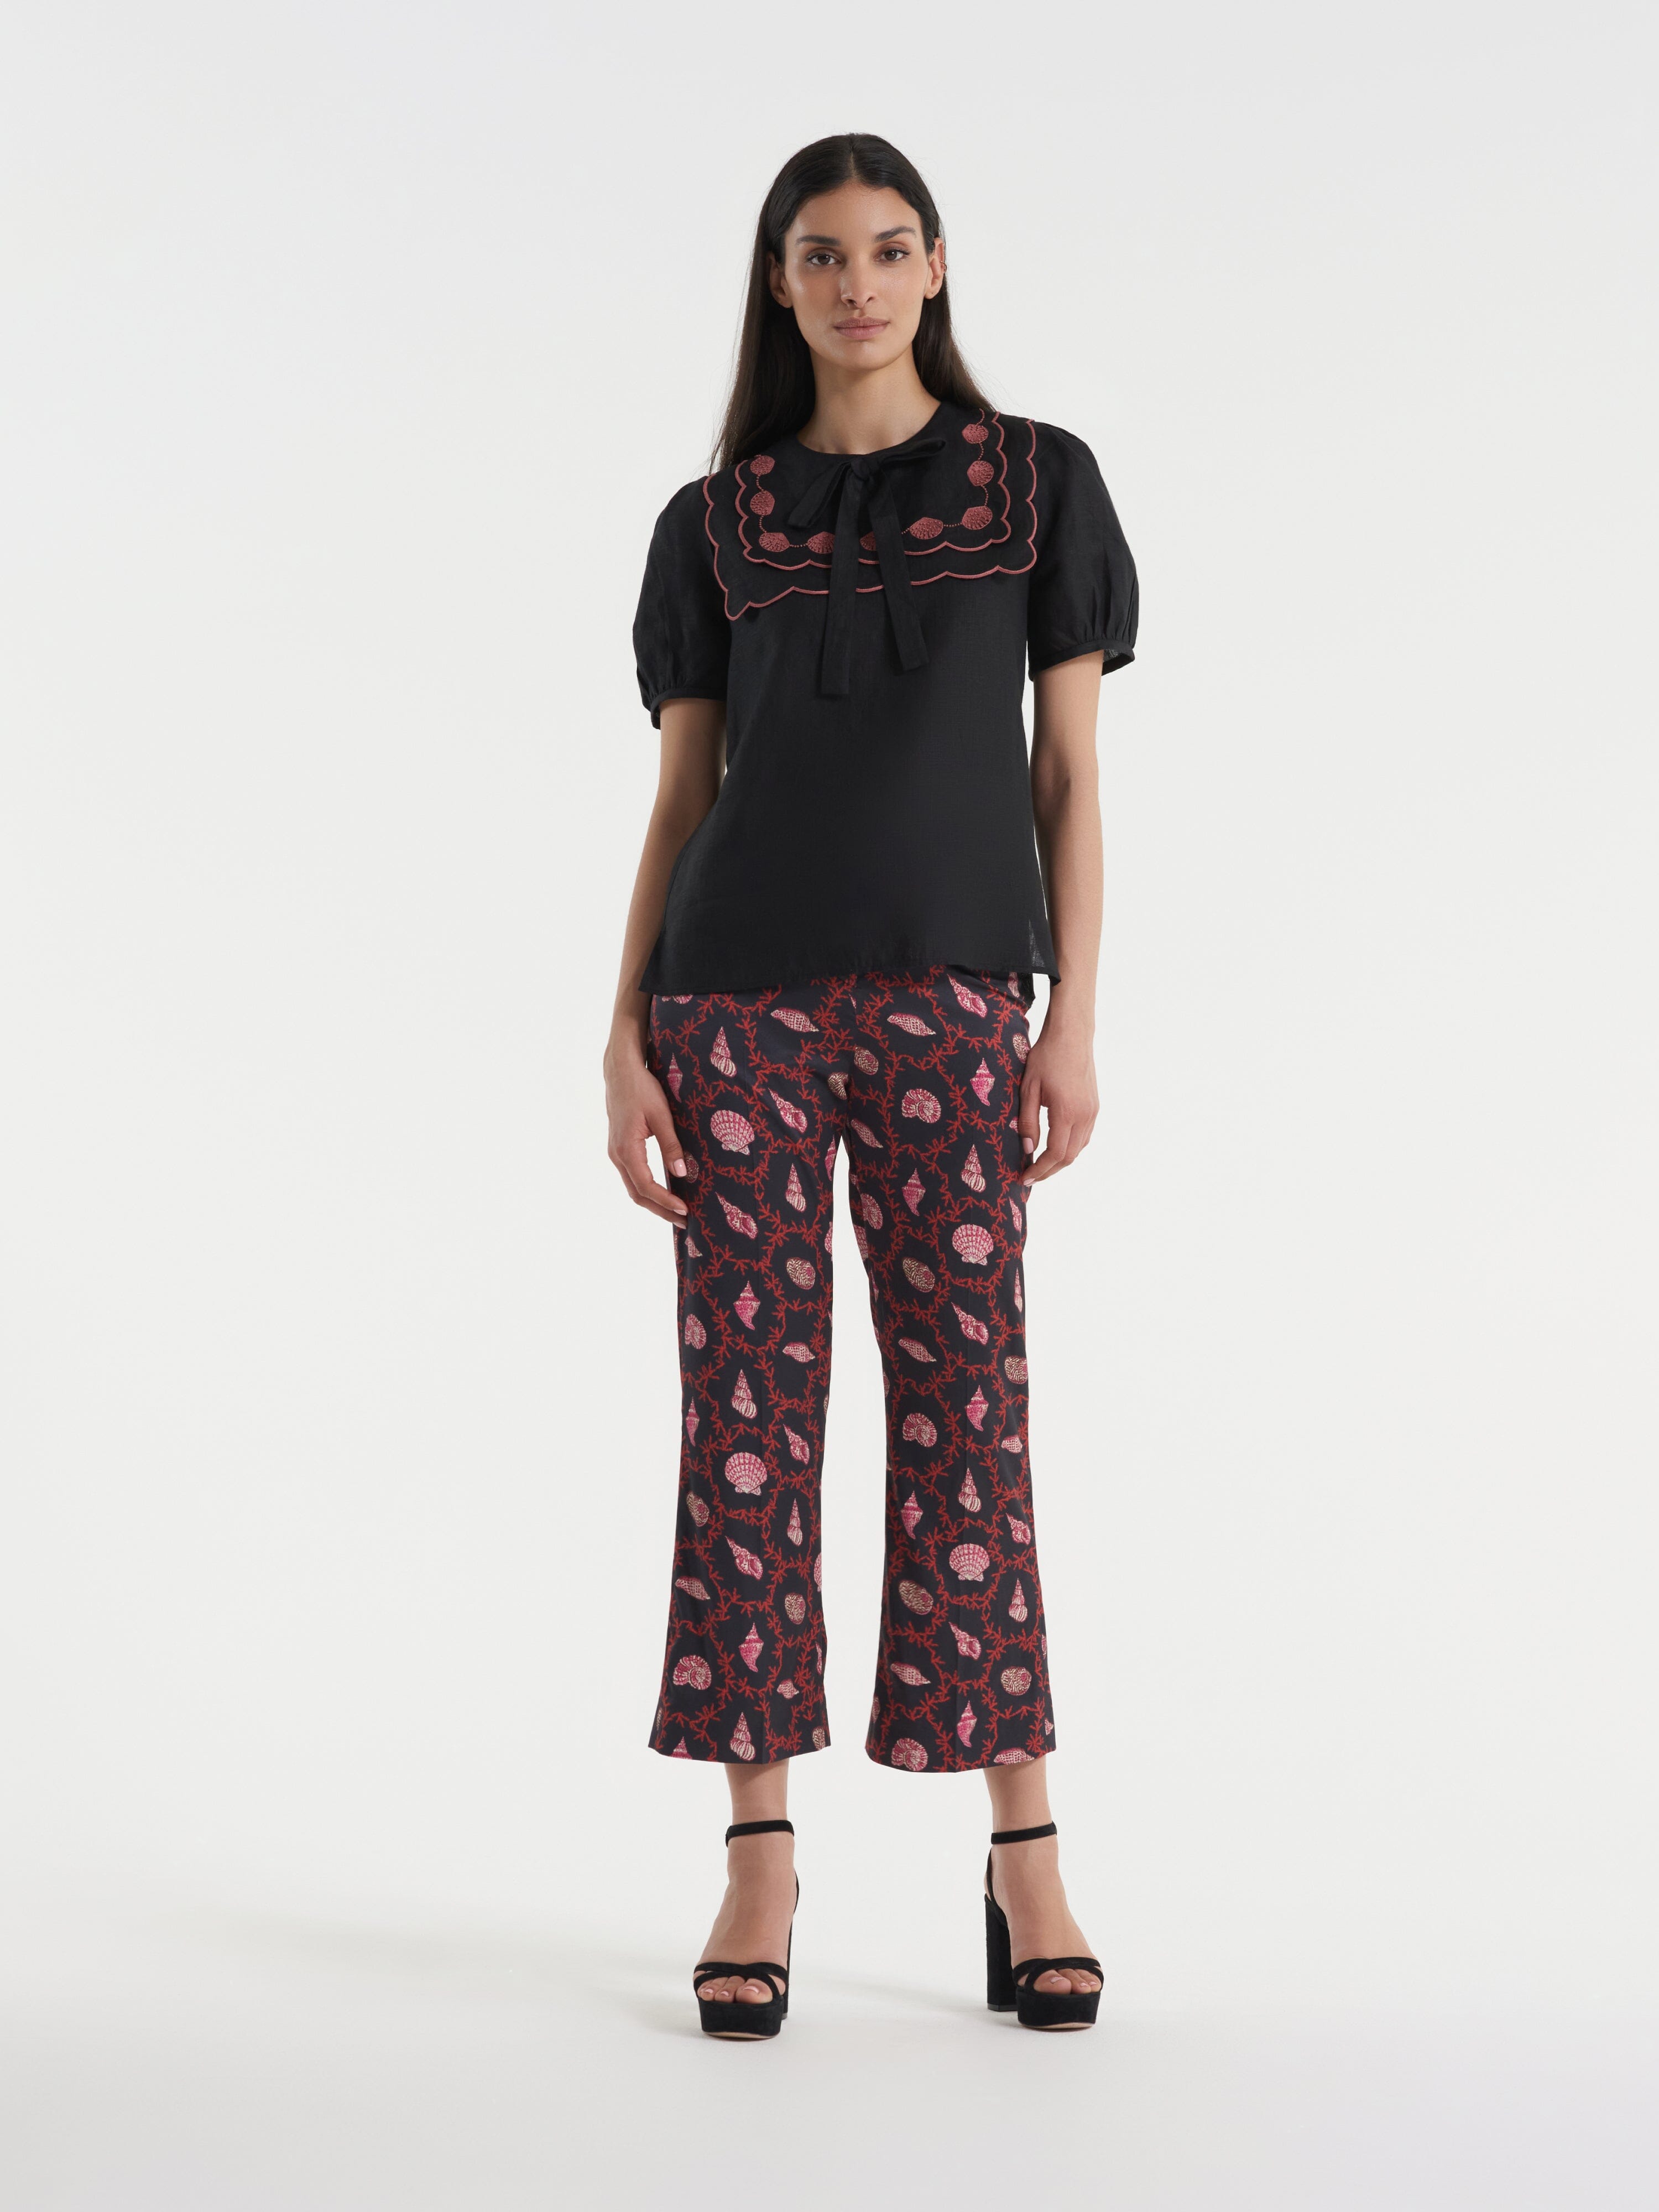 Marlowe B Top in Black Shell Embroidery